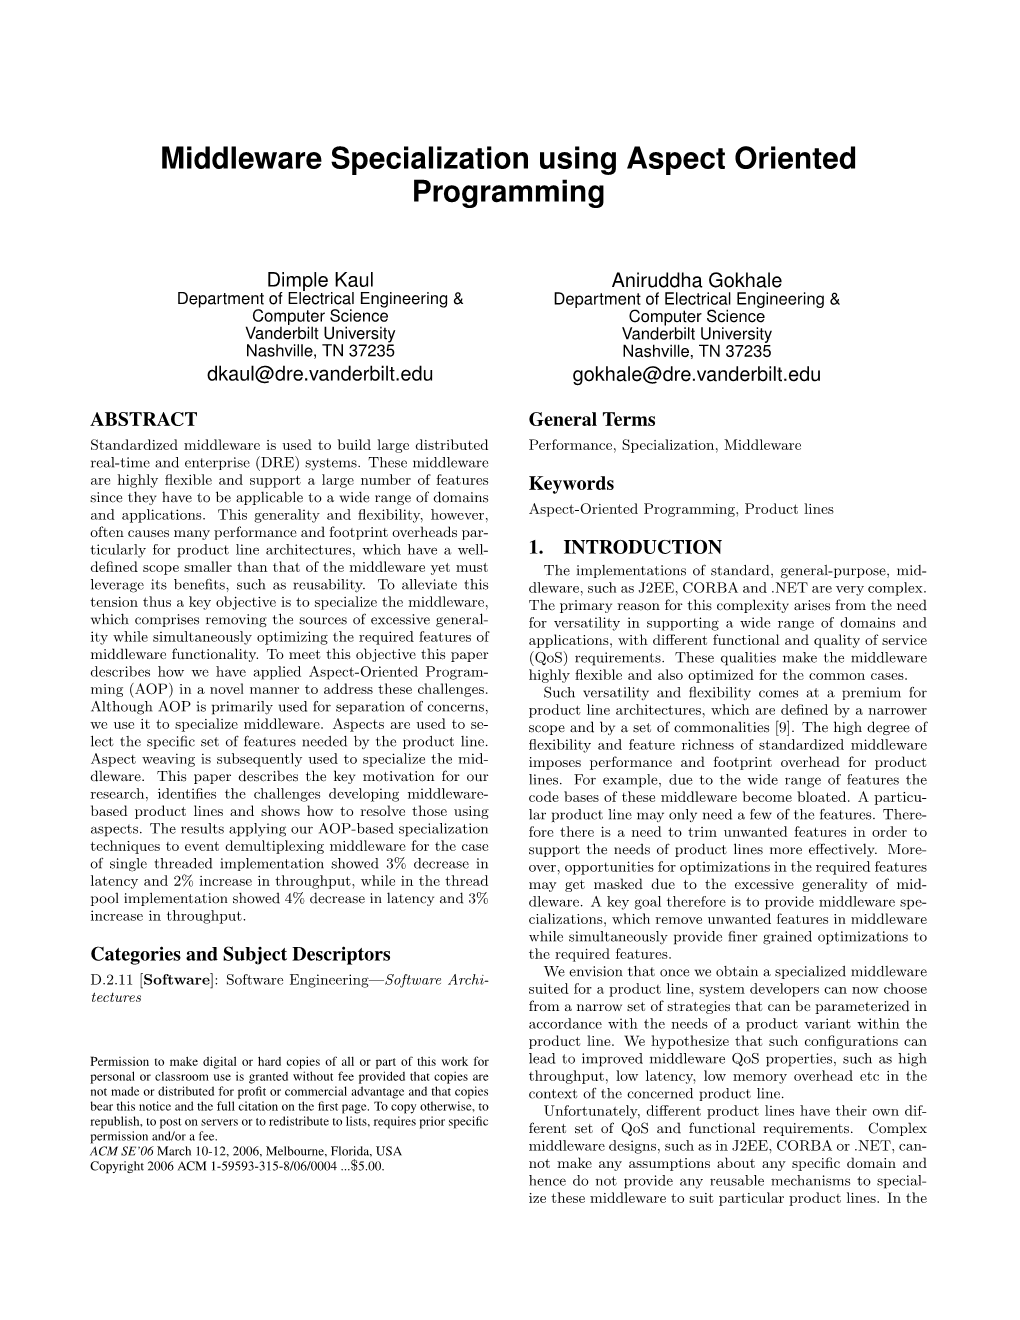 Middleware Specialization Using Aspect Oriented Programming